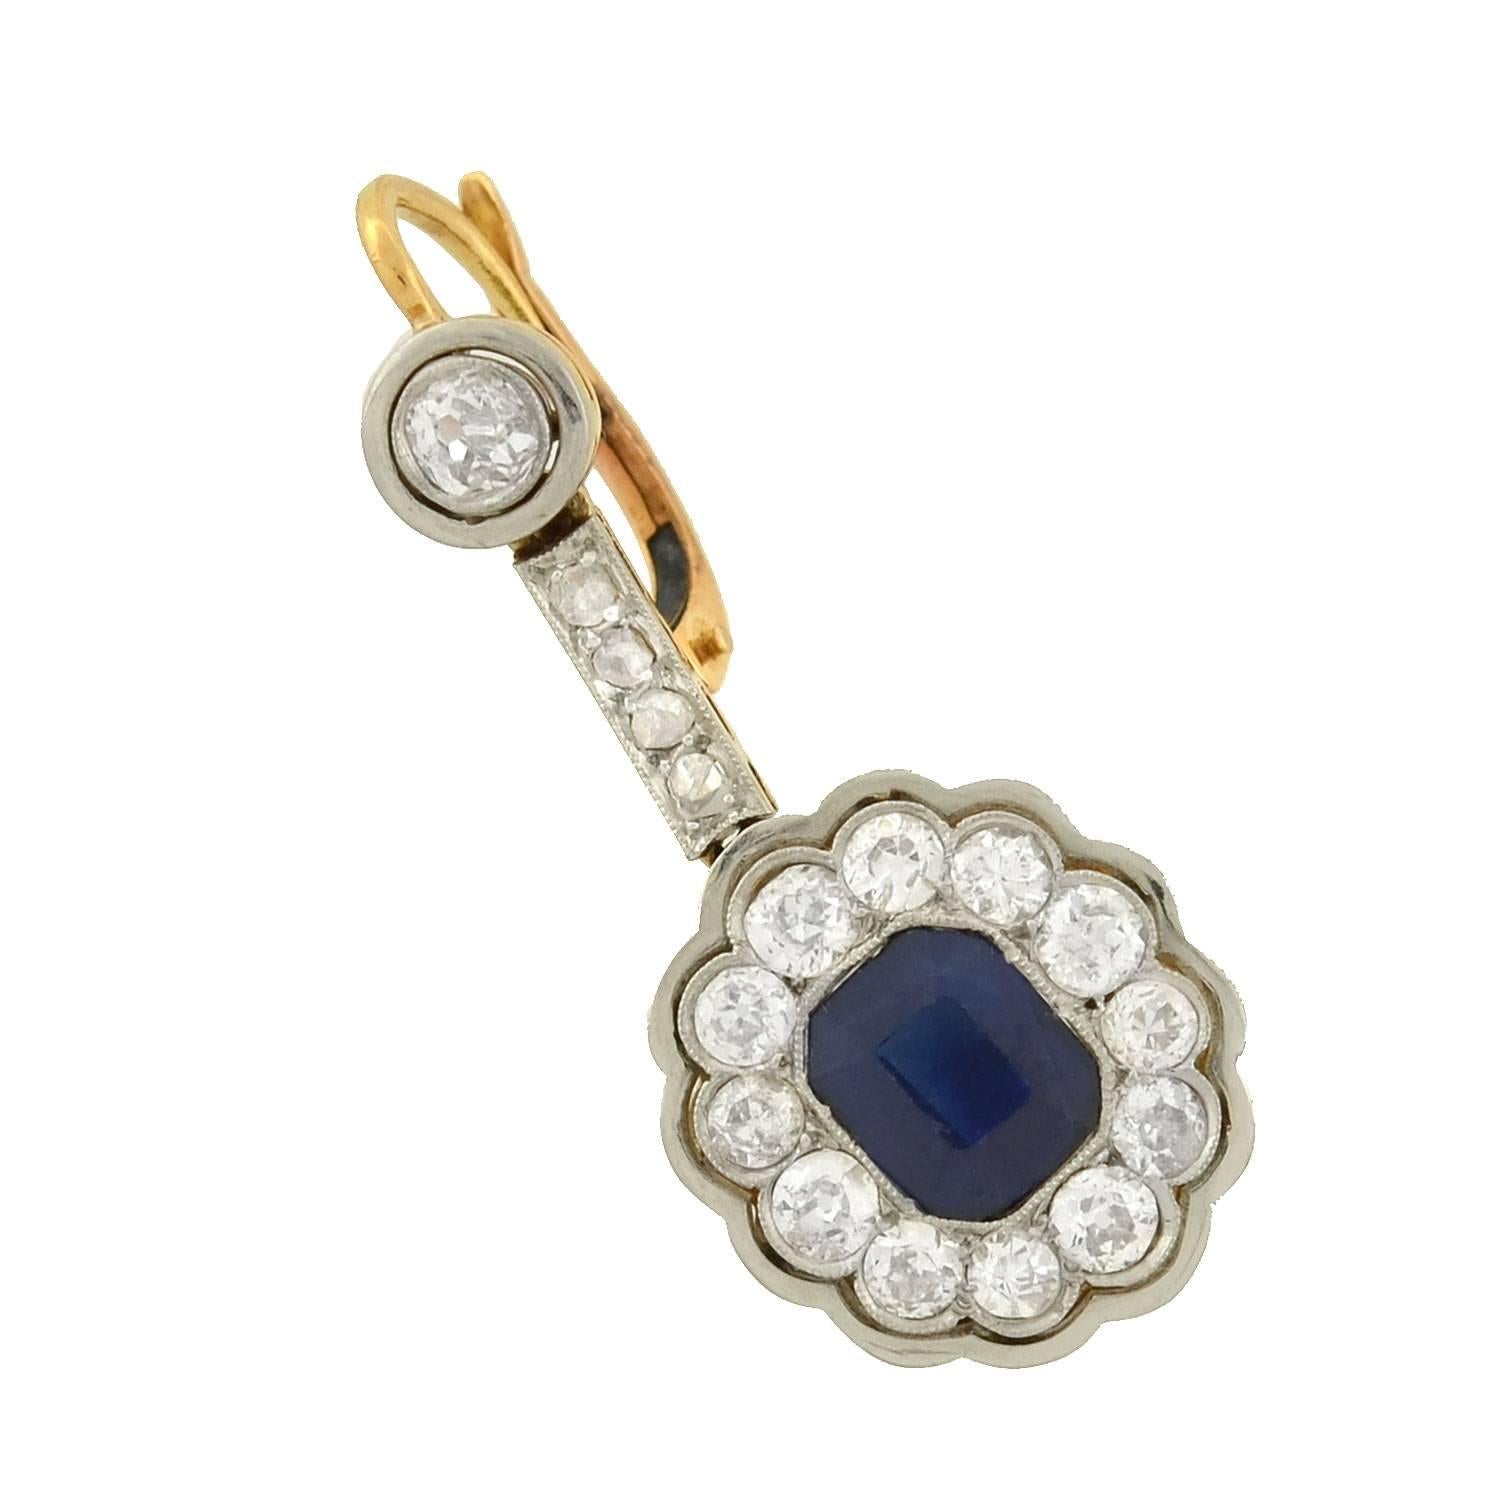 A breathtaking pair of sapphire and diamond earrings from the Edwardian (ca1910) era! These exquisite mixed metals earrings are made of platinum-topped 14kt gold, and have an elegant dangling design. A sapphire and diamond link hangs at the base,